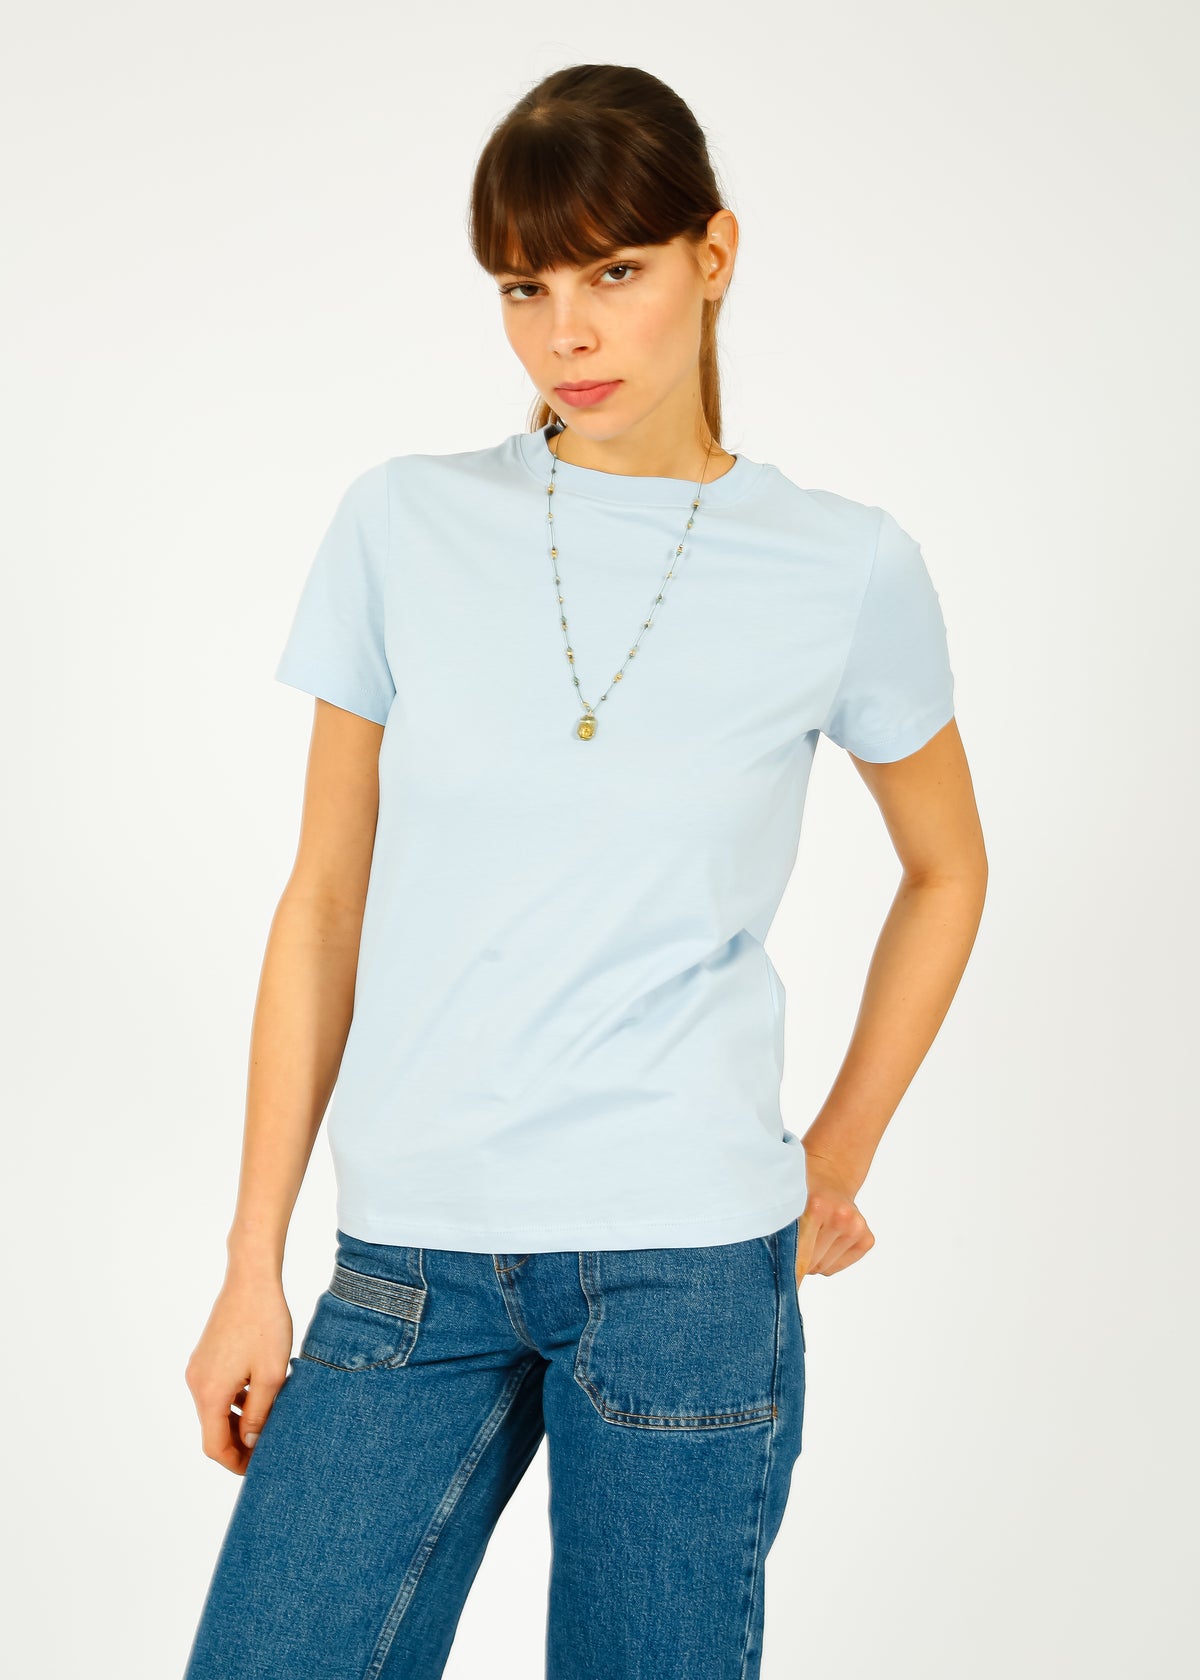 SLF Essential SS Tee in Cashmere Blue